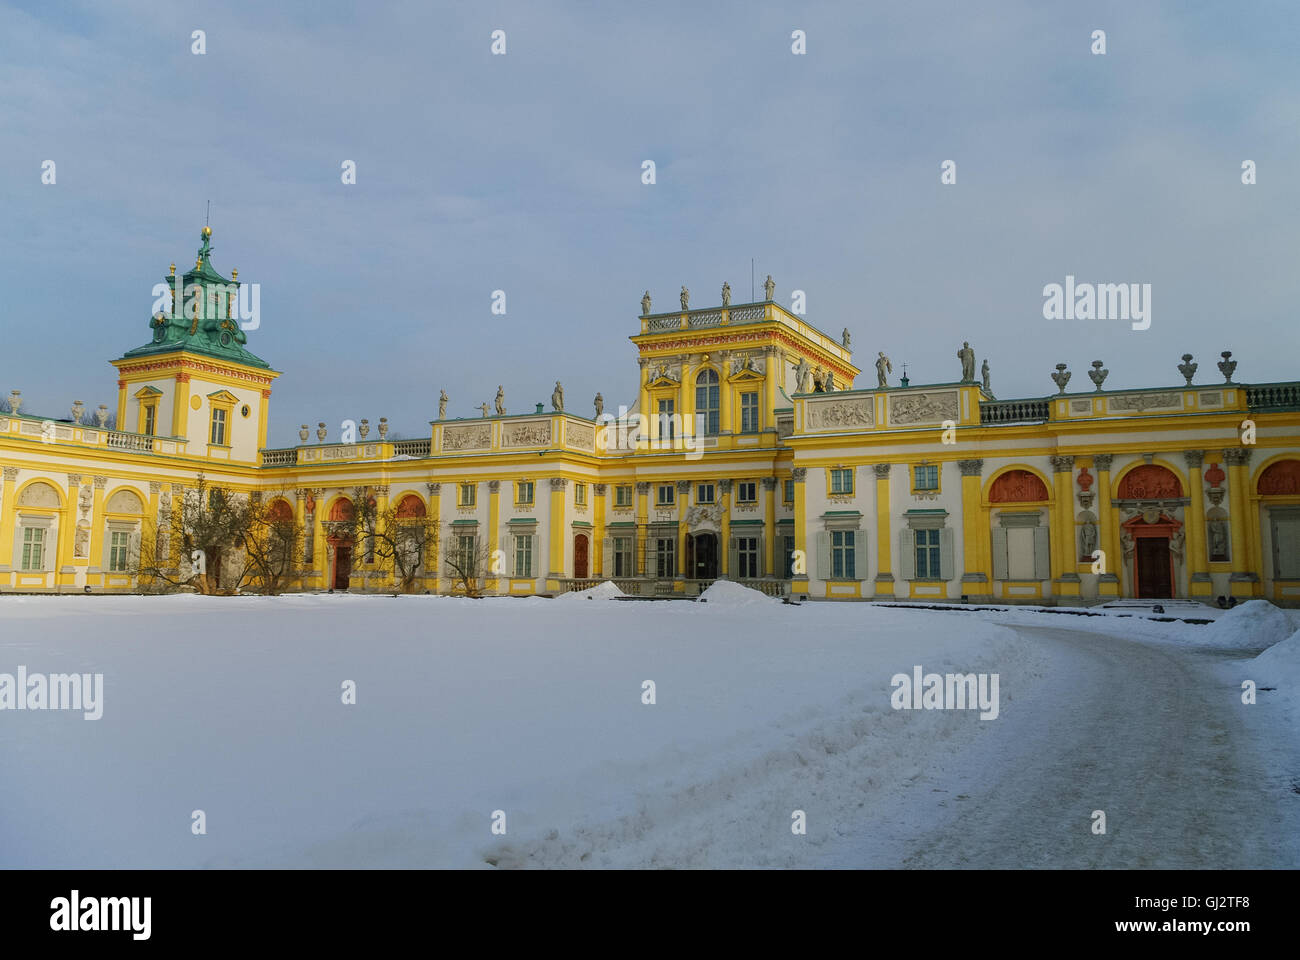 Warsaw, Poland - January 5, 2011: Winter view of Museum of King Jan III's Palace in snow. Wilanow. Warsaw, Poland Stock Photo